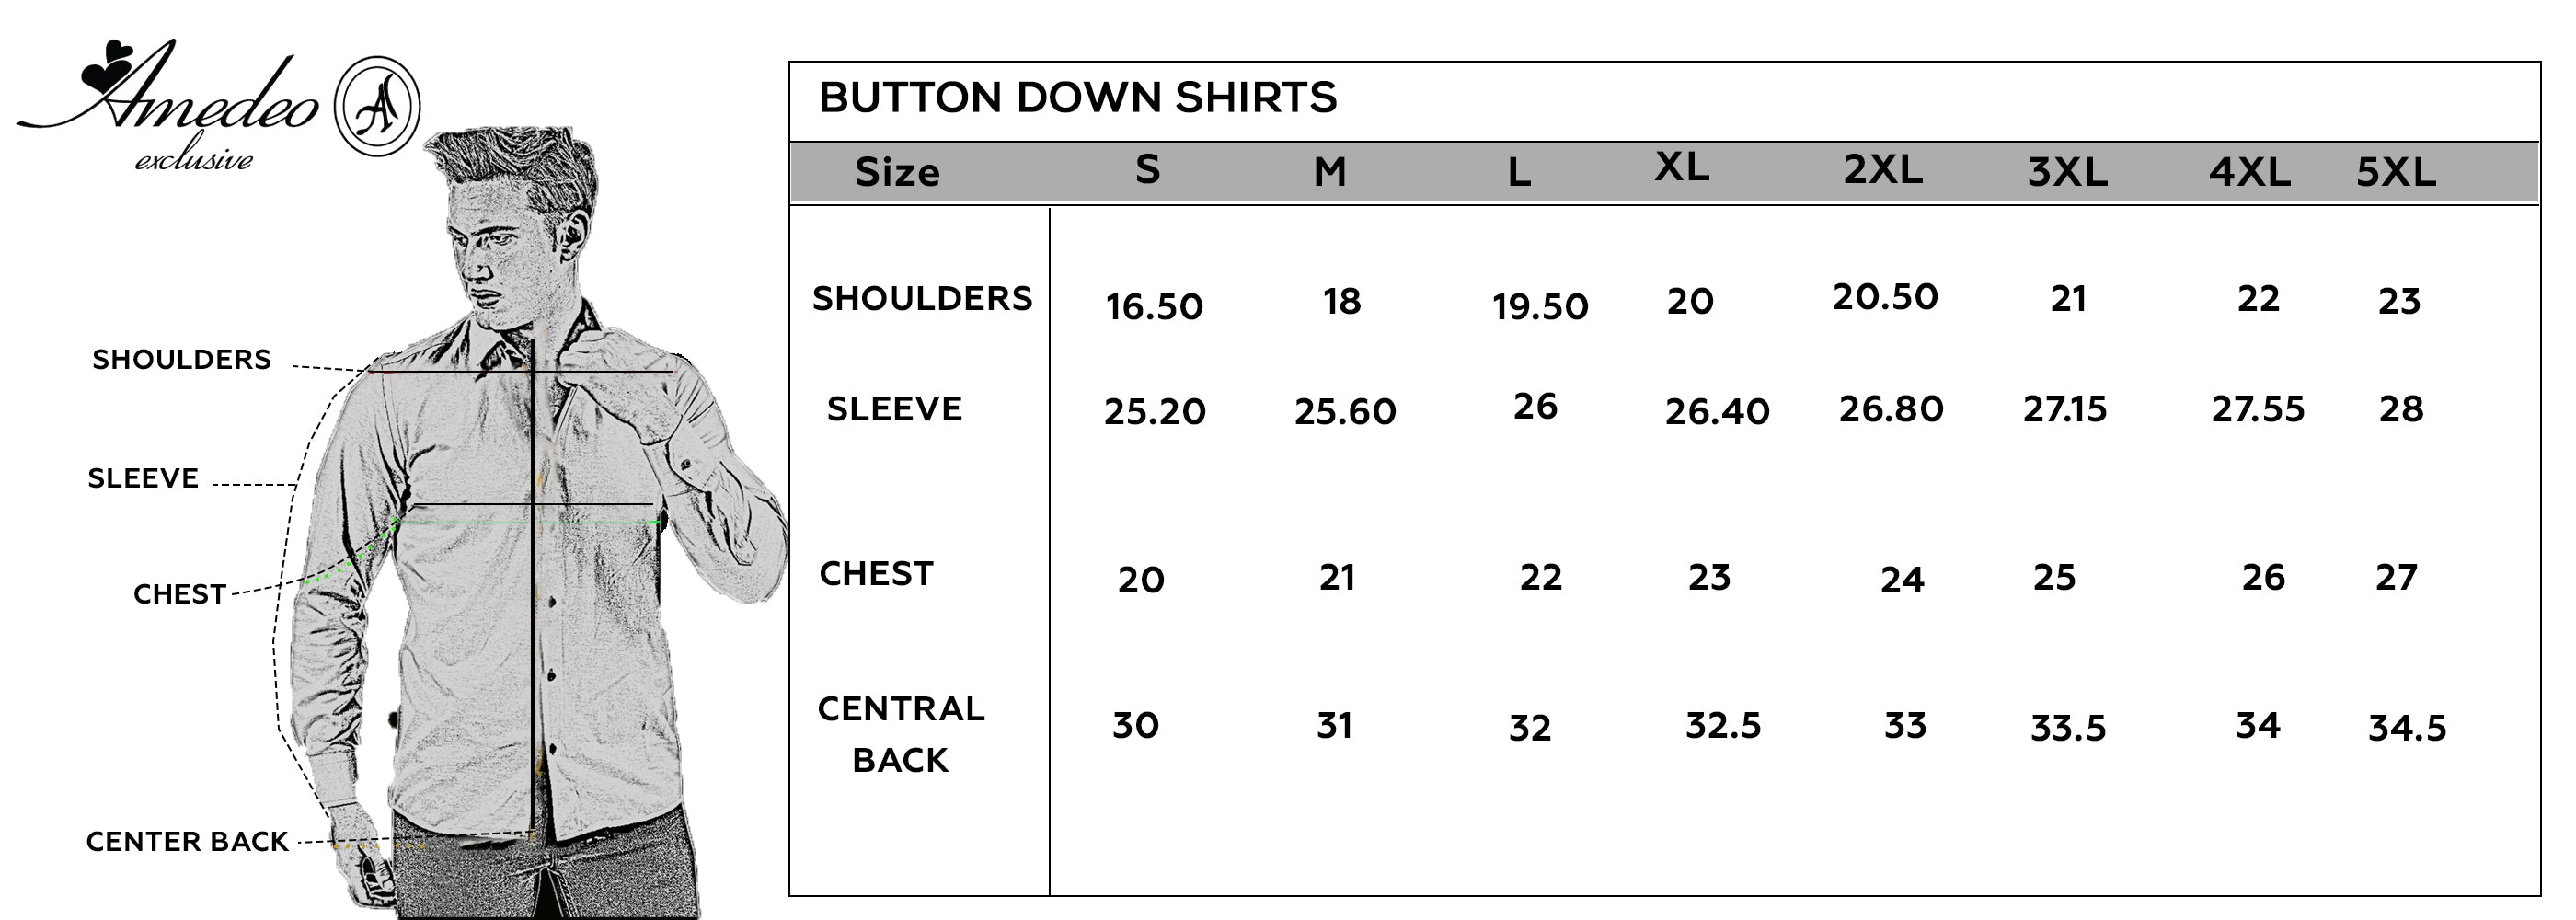 Mens Slim Fit Designer Dress Shirt - tailored Cotton Shirts for Work and Casual Wear